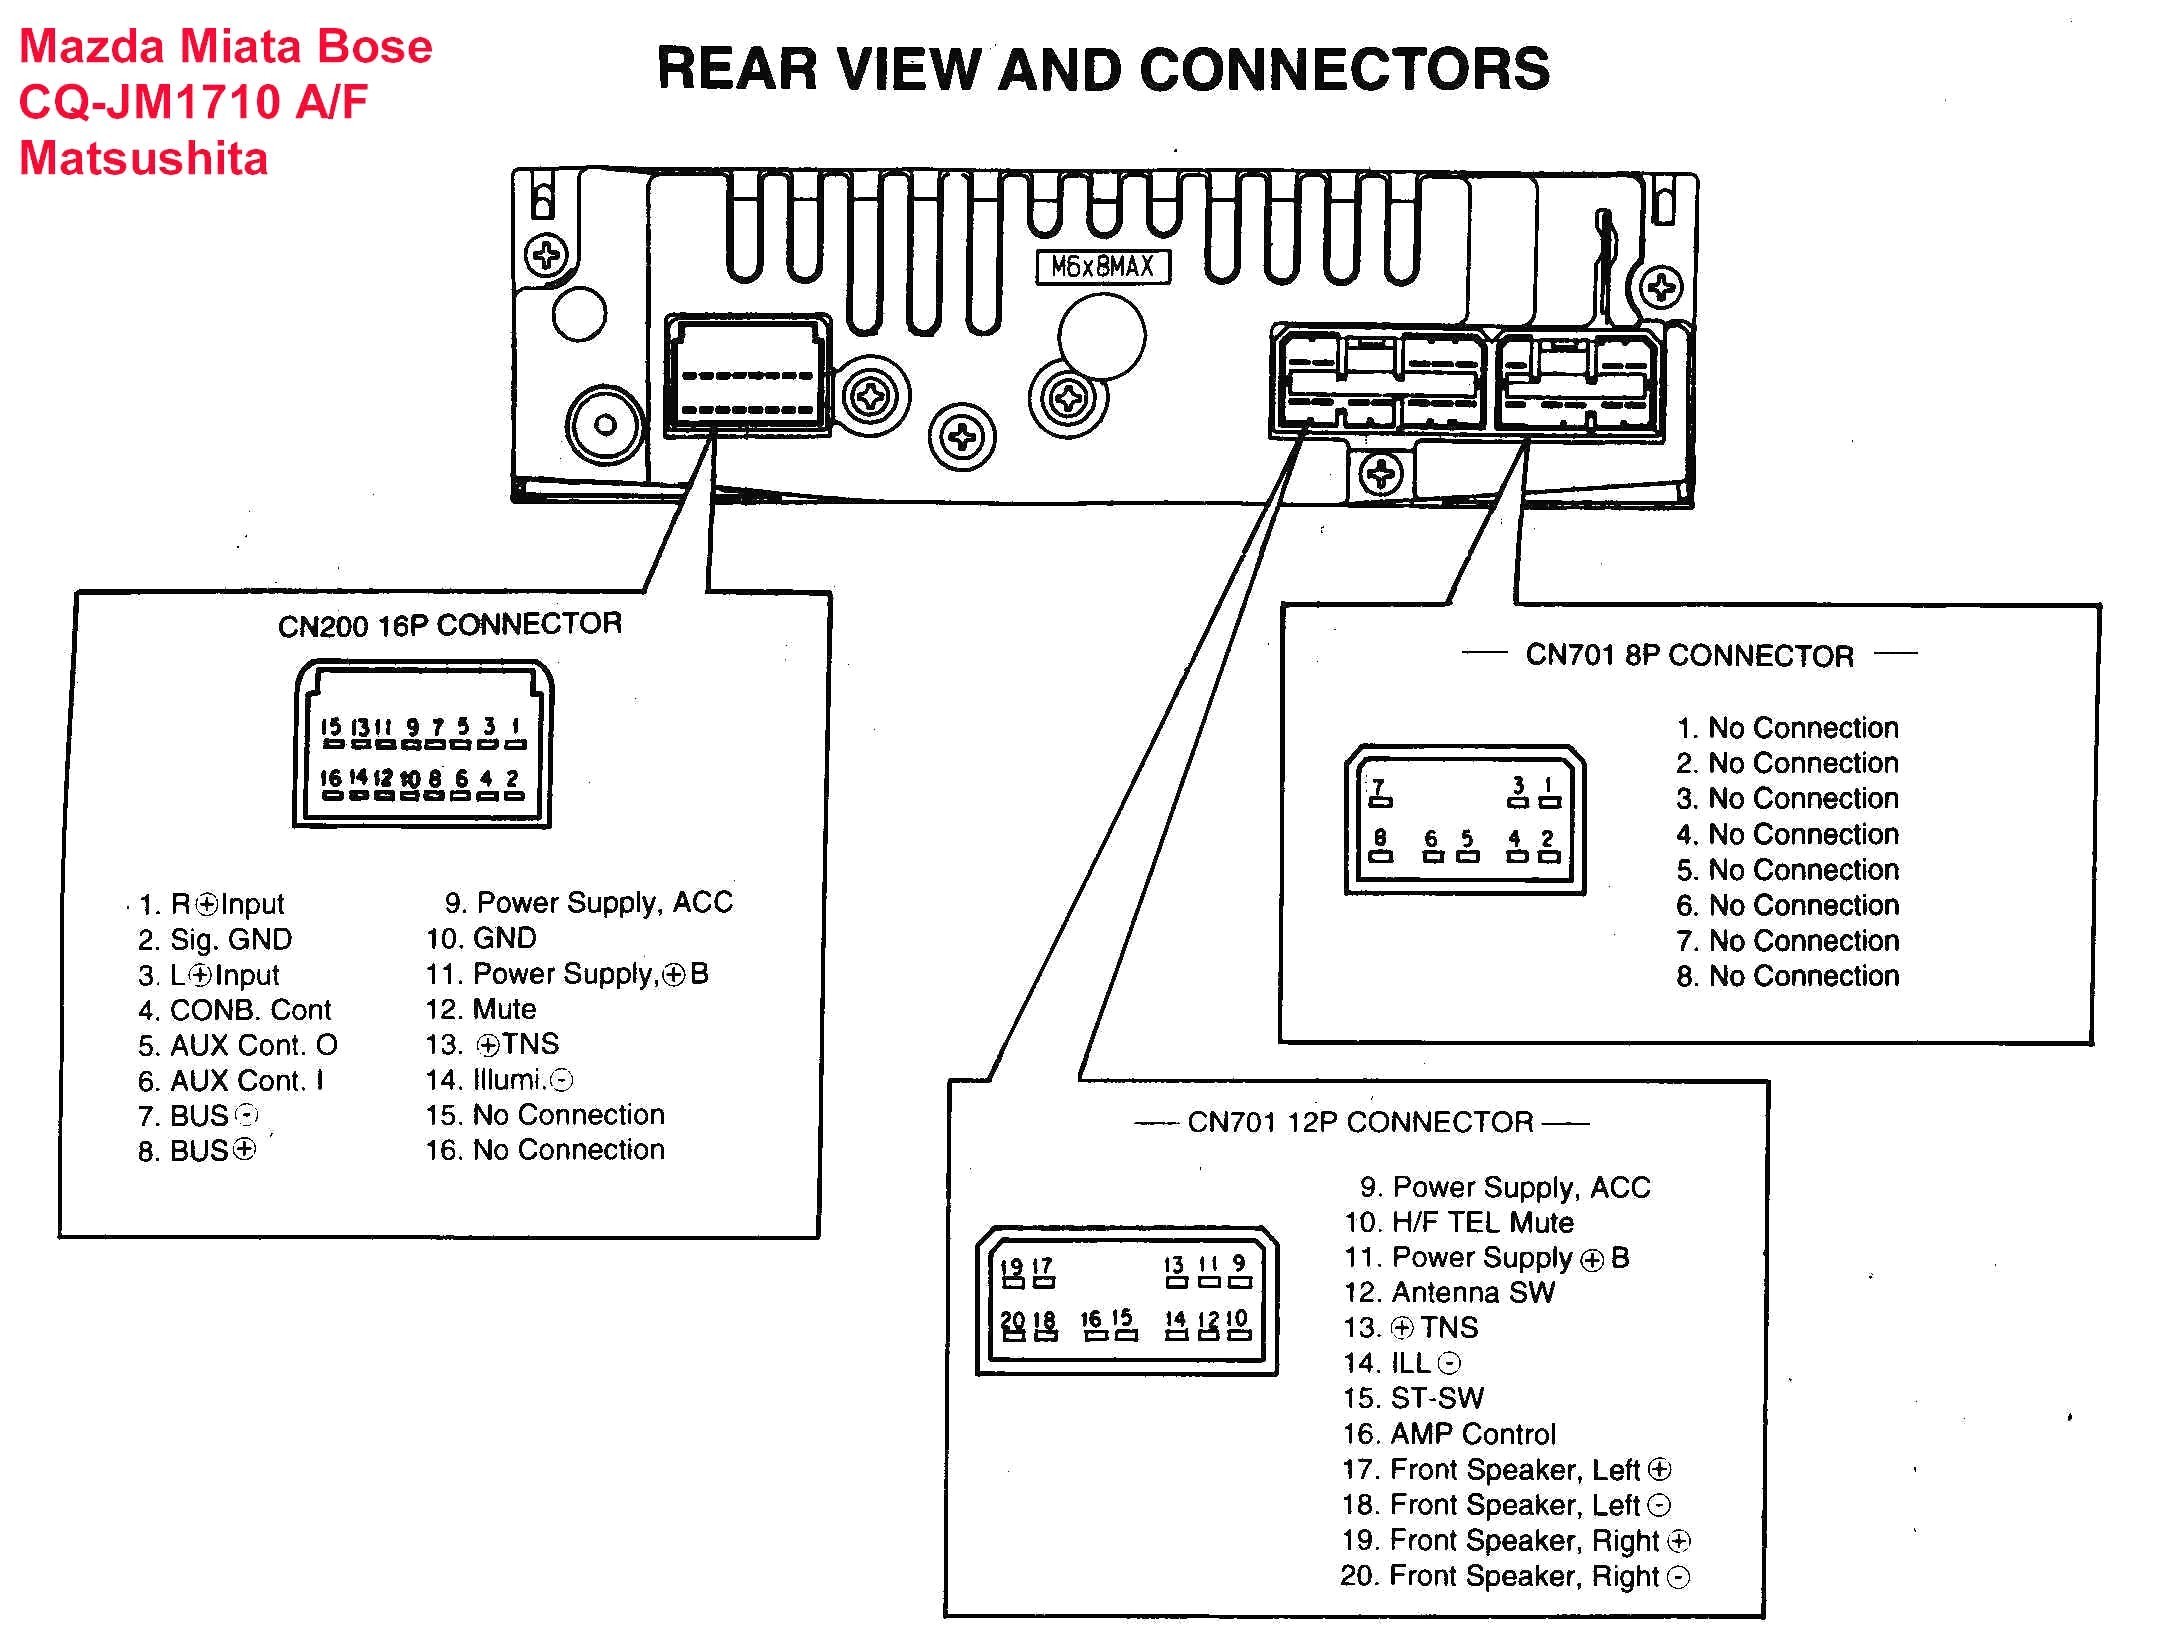 sony car stereo wiring diagram the stereo layout of an wire data rh kiymik co panasonic car stereo wiring color codes panasonic car stereo wiring color